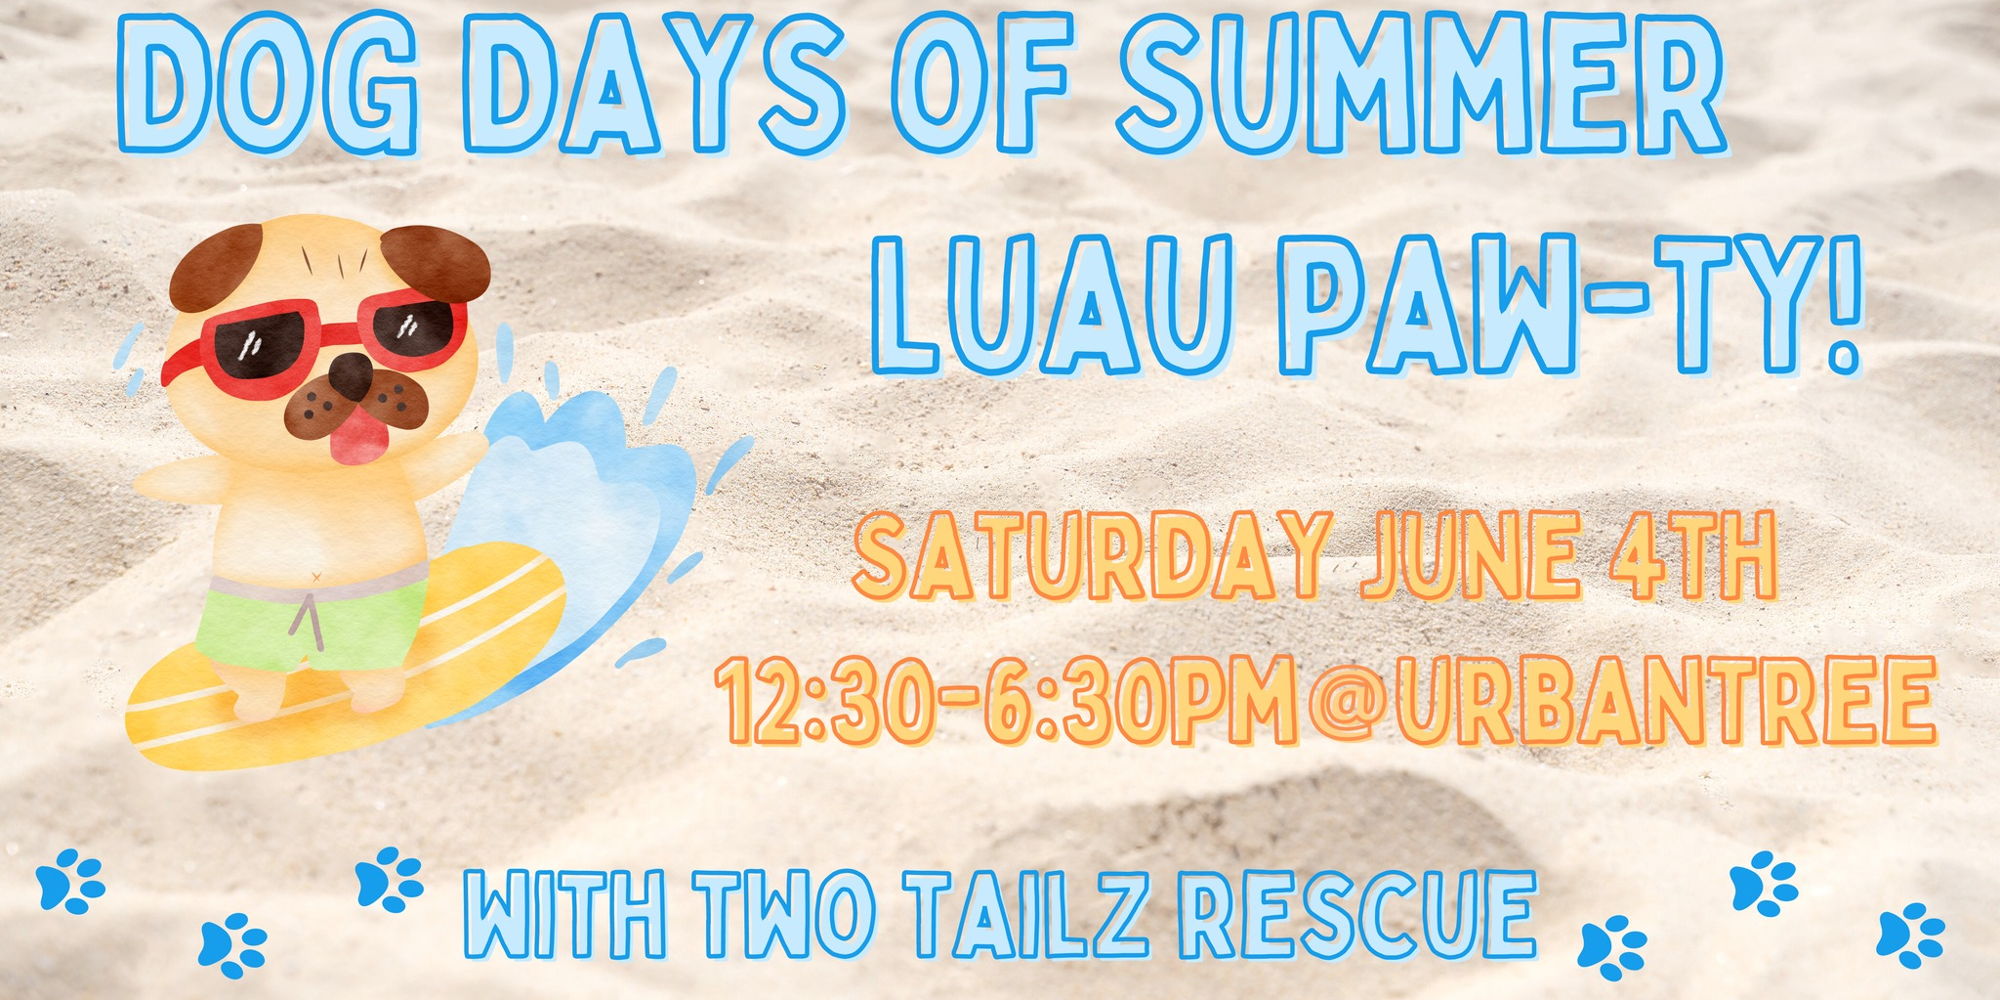 Dog Days of Summer: Luau Paw-ty with Two Tailz Rescue! promotional image